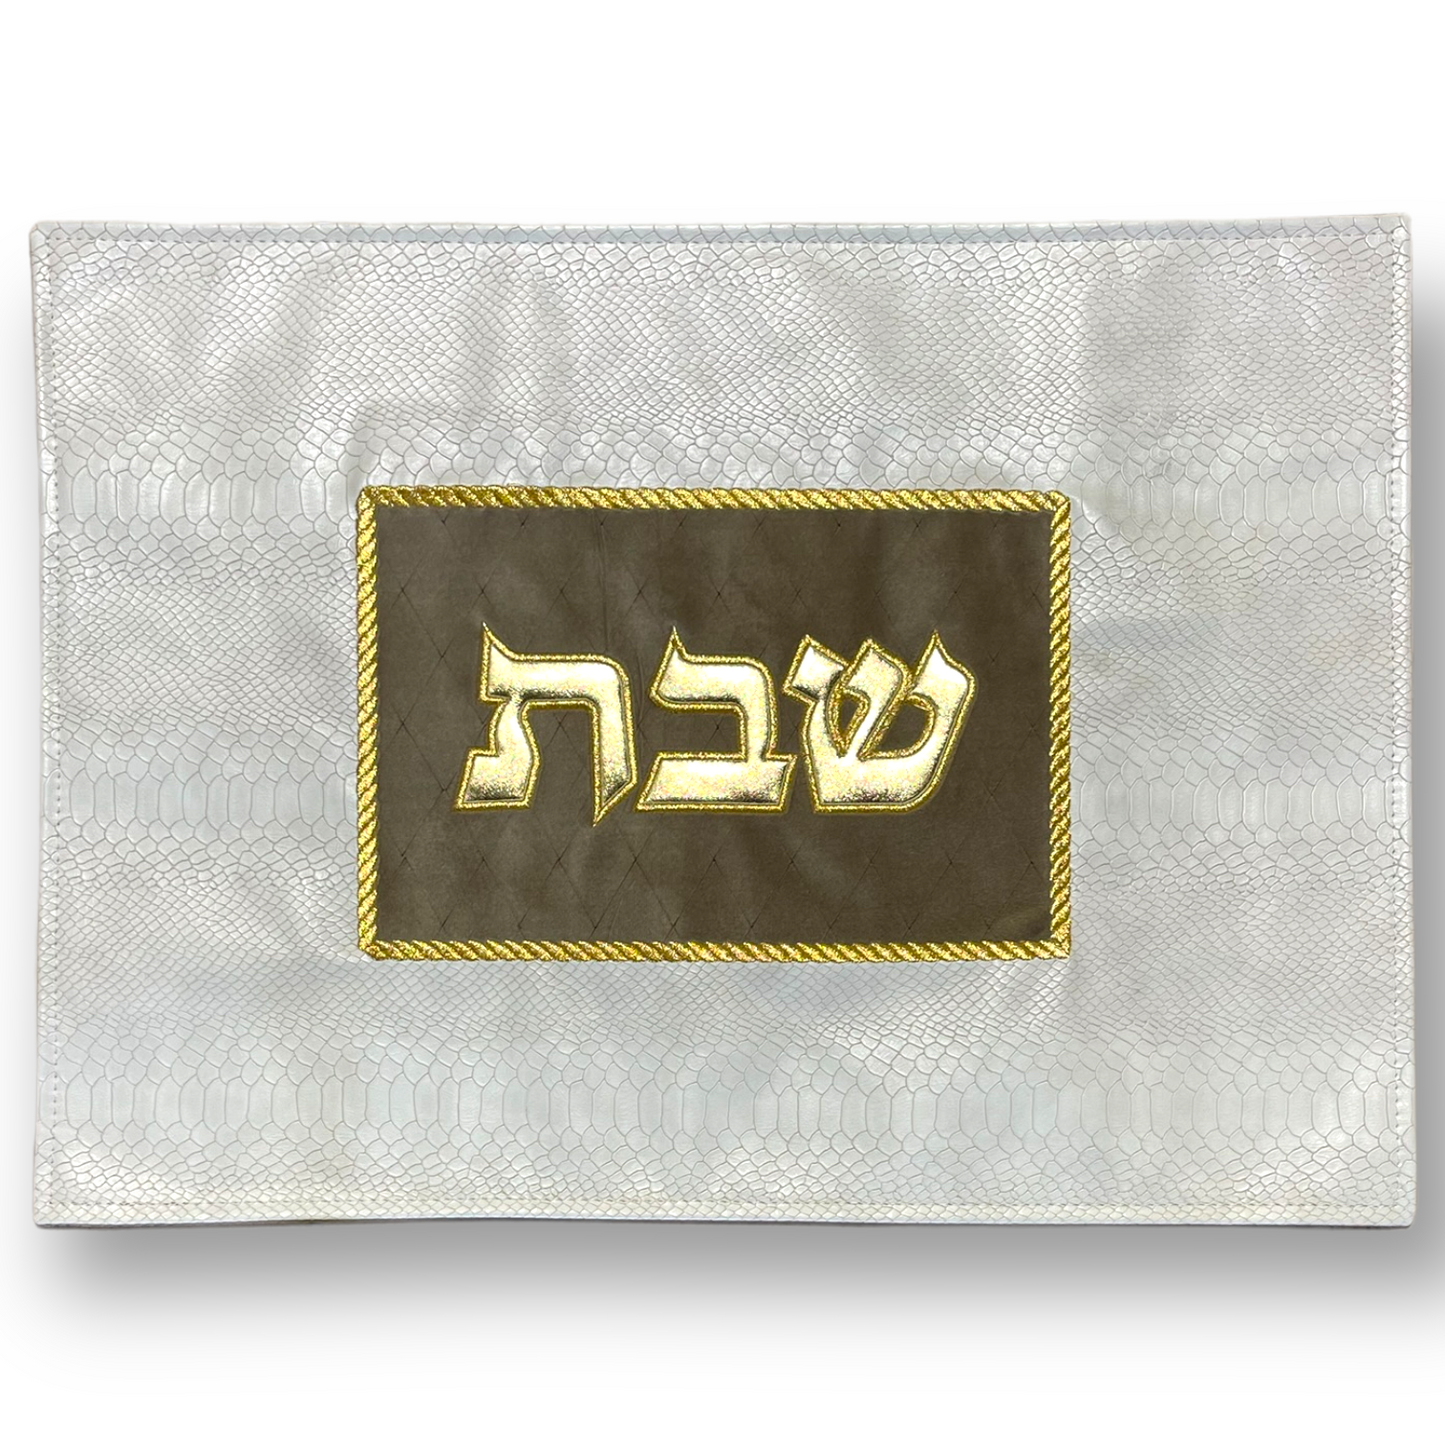 Luxurious leather like Challah Cover - Of white, beige and gold with beautiful golden embroidered frame for shabbat shabbat decor